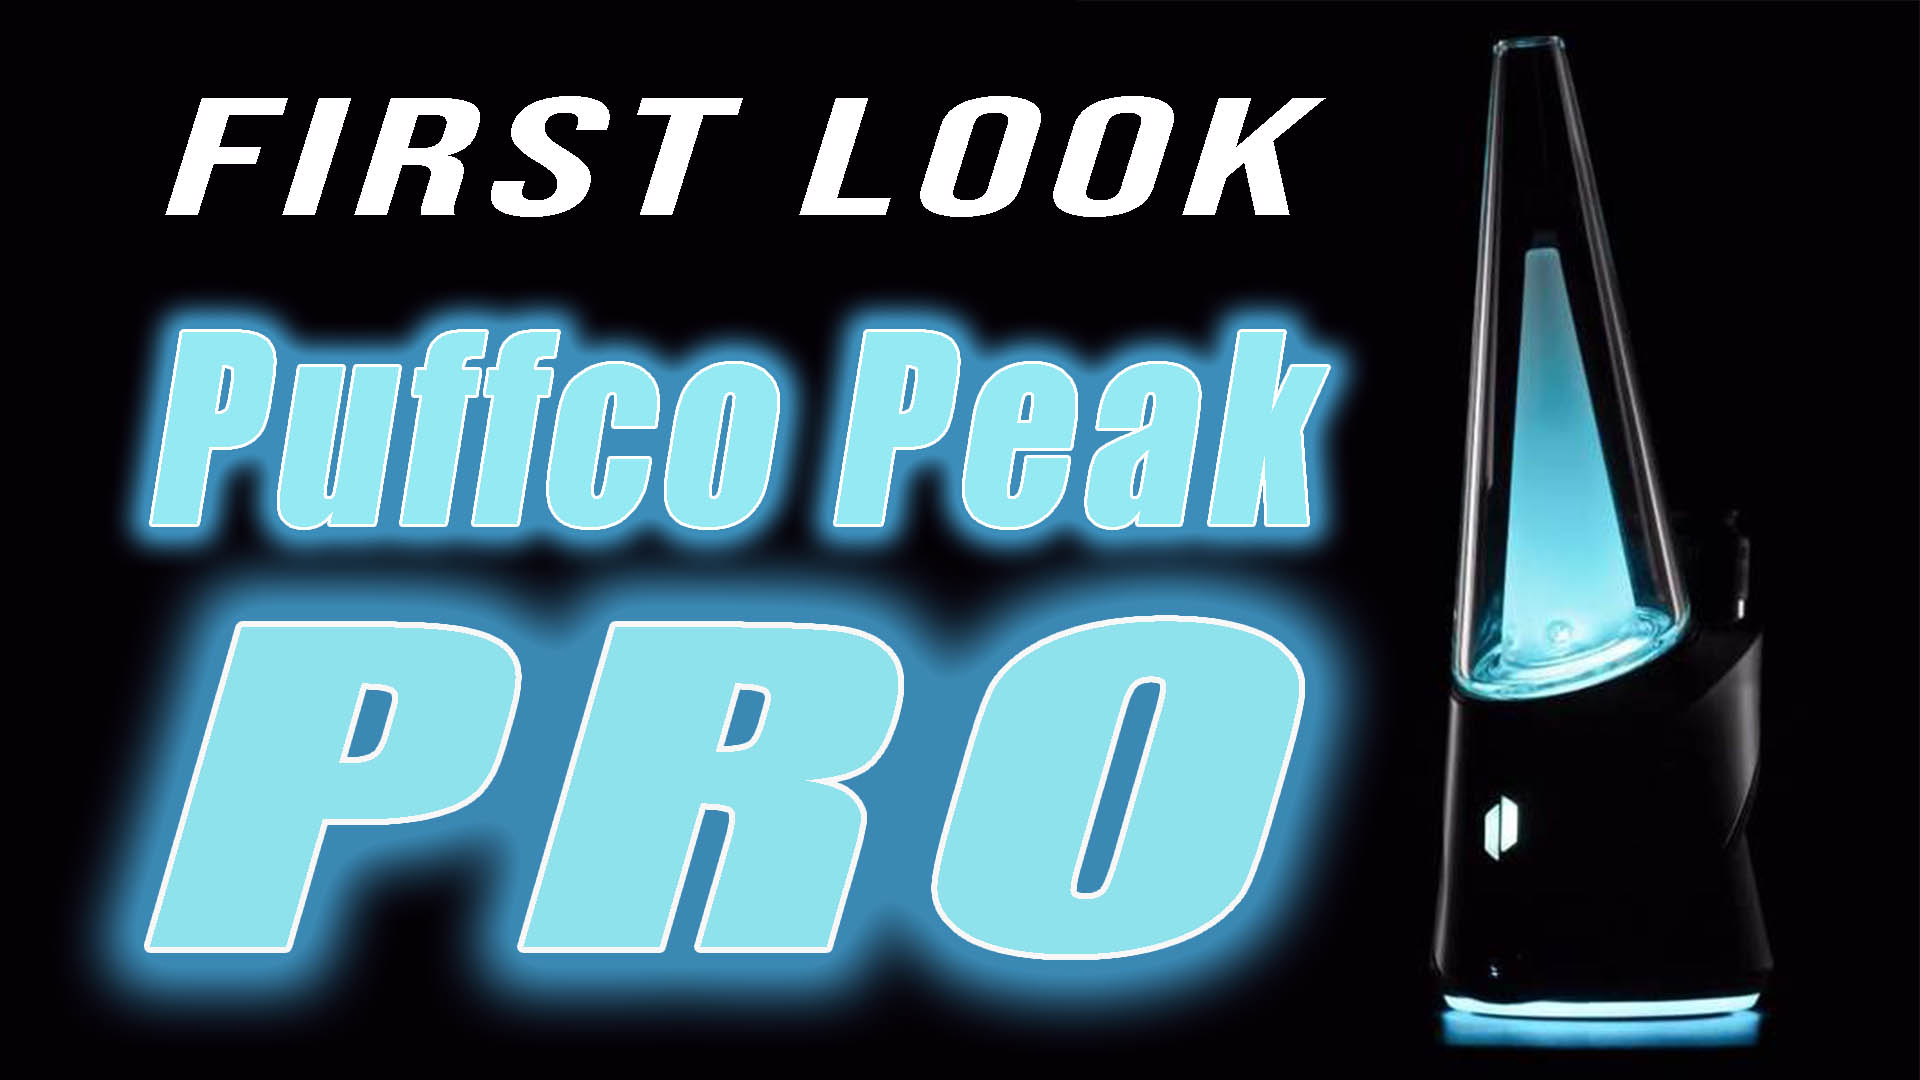 Puffco Peak PRO is HERE: First Look